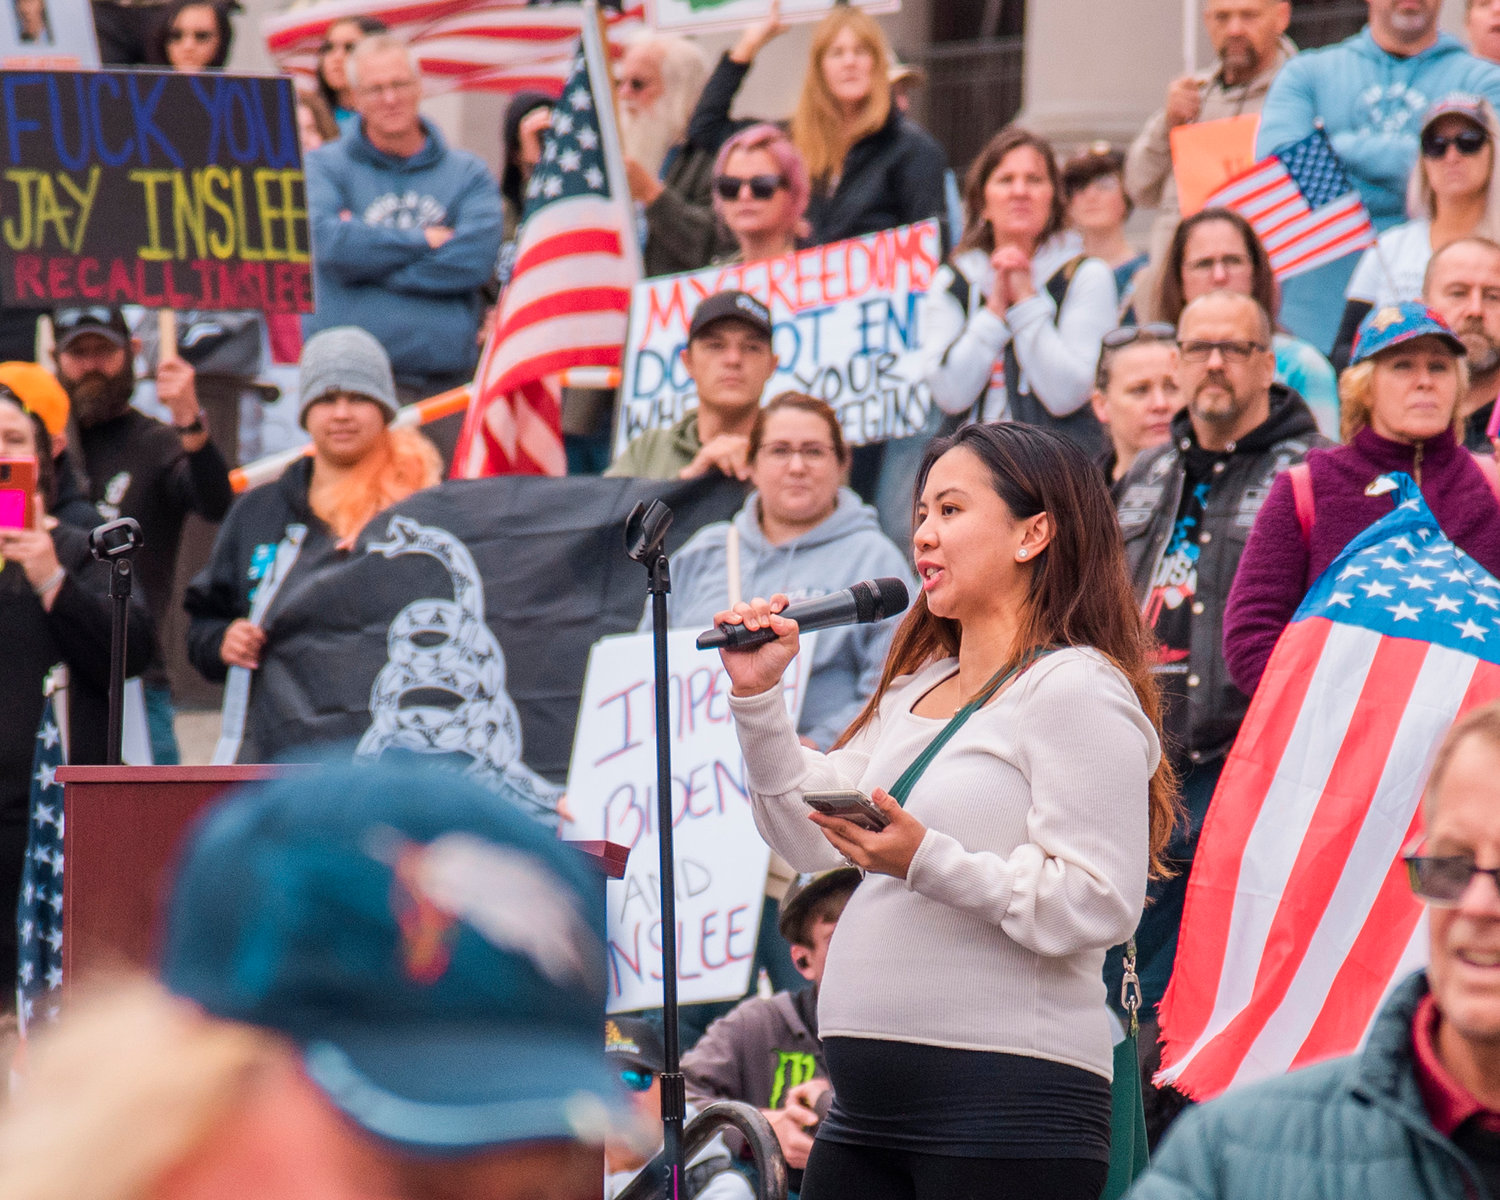 Kristianne Richardson, a pregnant Department of Social and Health Services employee speaks out against forced vaccinations during a “Medical Freedom Rally,” Sunday in Olympia.